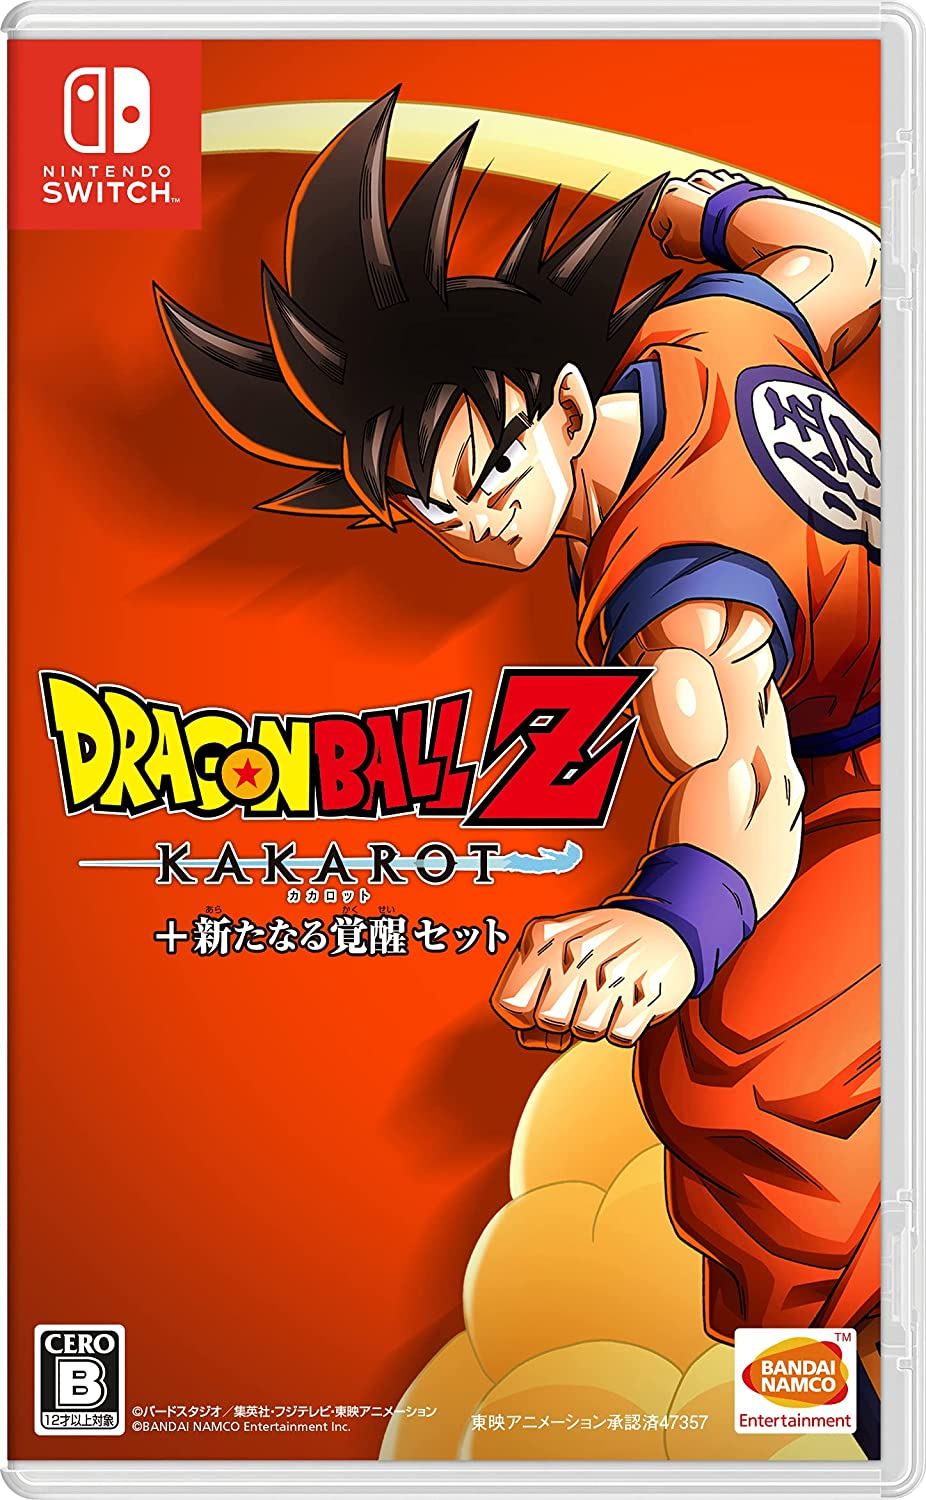 Play PlayStation Dragon Ball Z: The Legend Online in your browser 